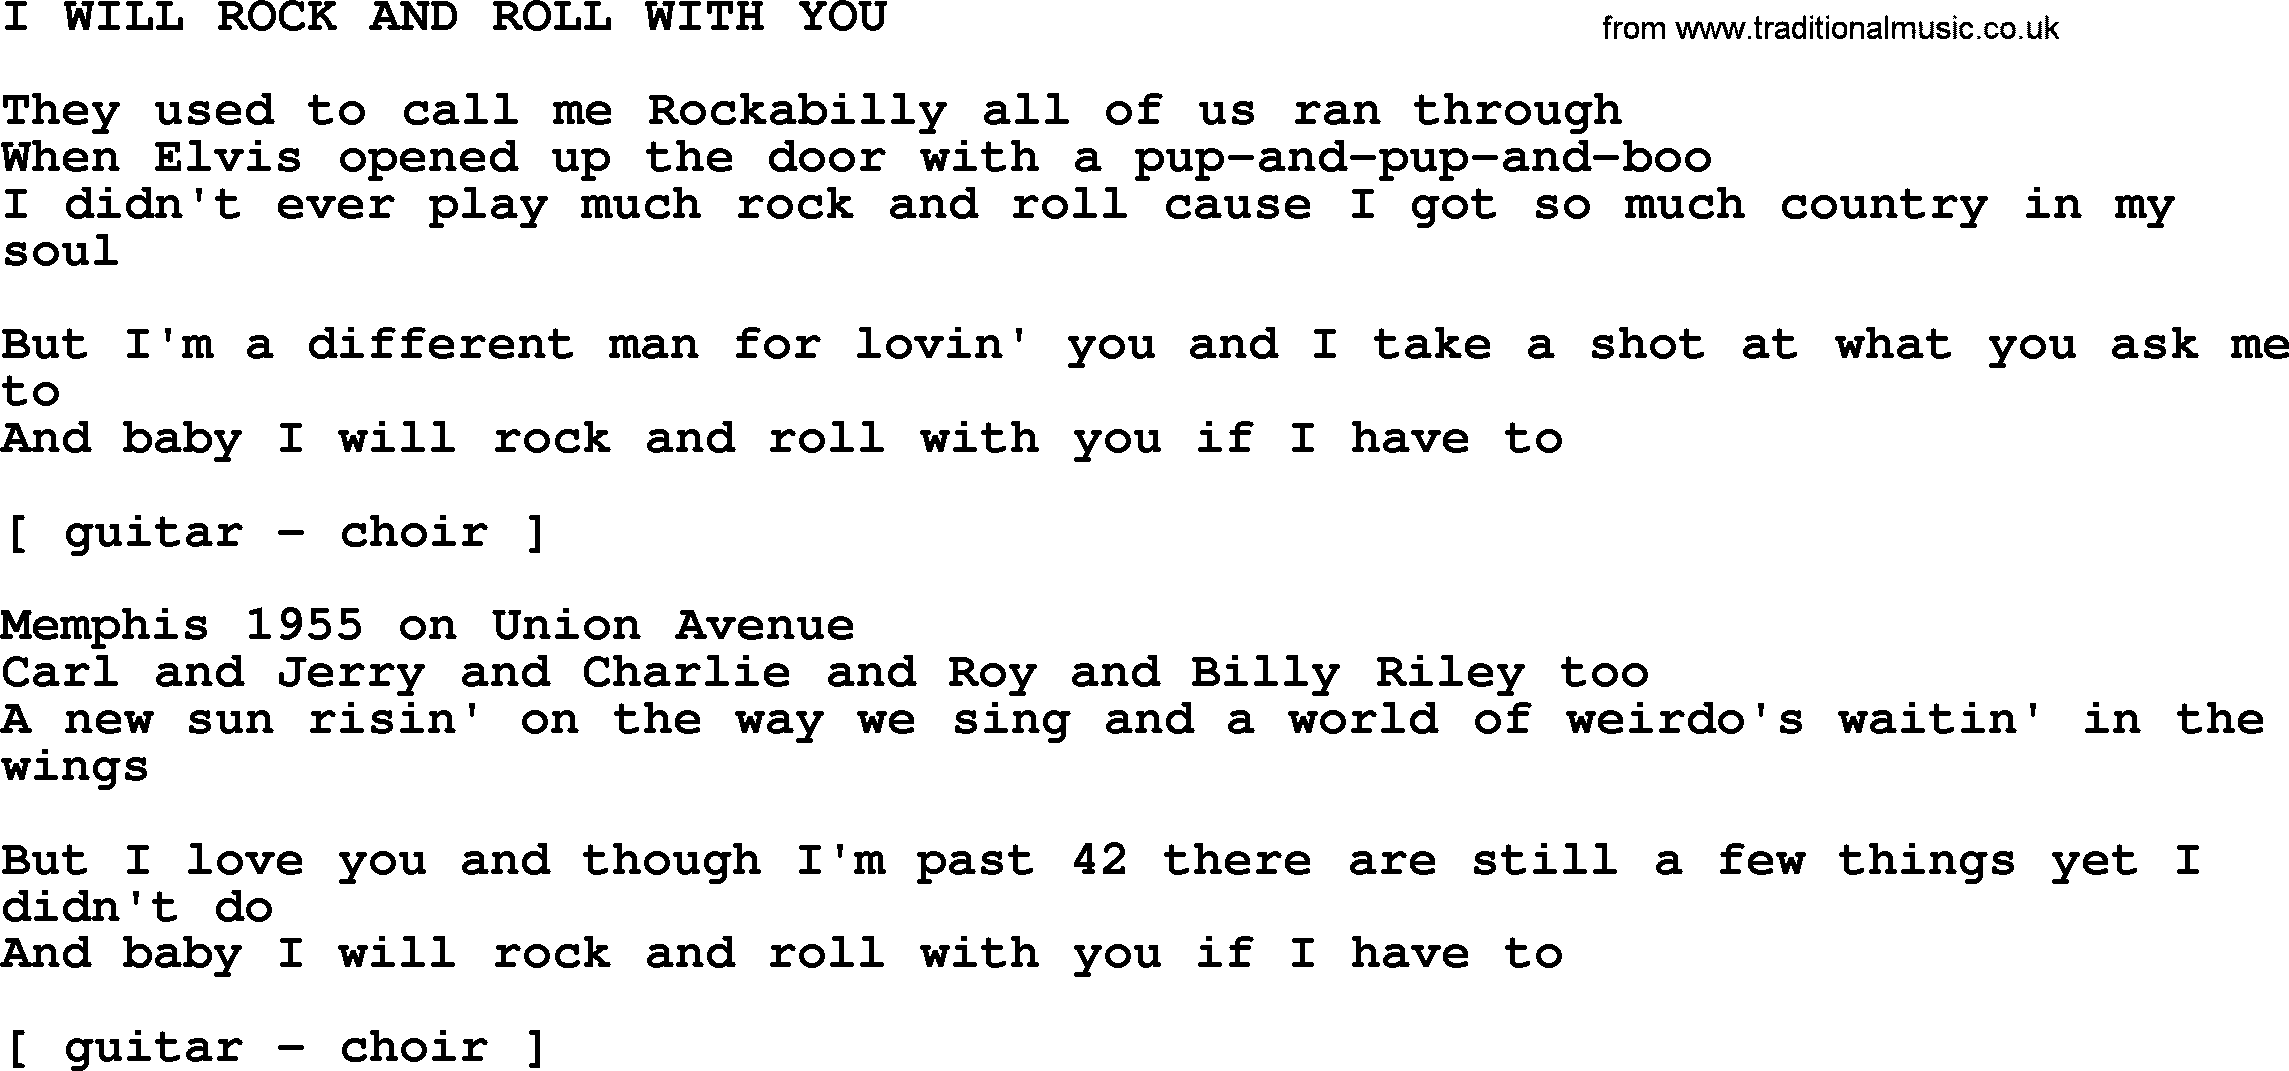 Johnny Cash song I Will Rock And Roll With You.txt lyrics